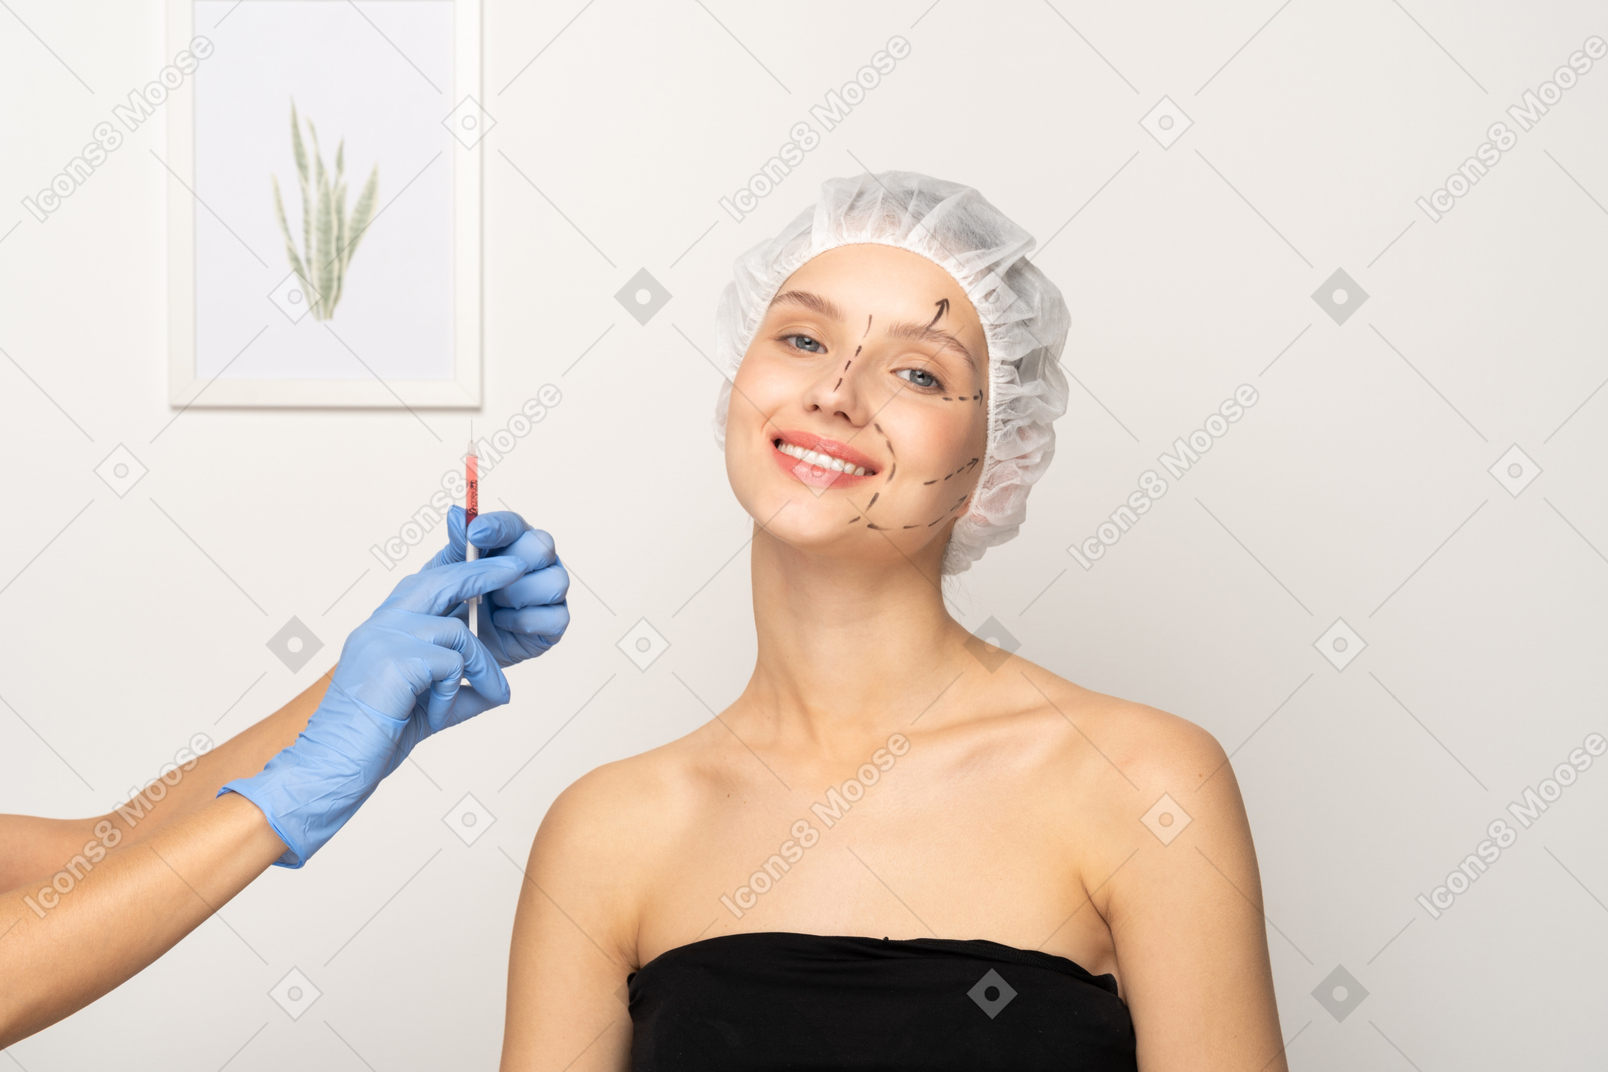 Young woman smiling and gloved hand holding up syringe